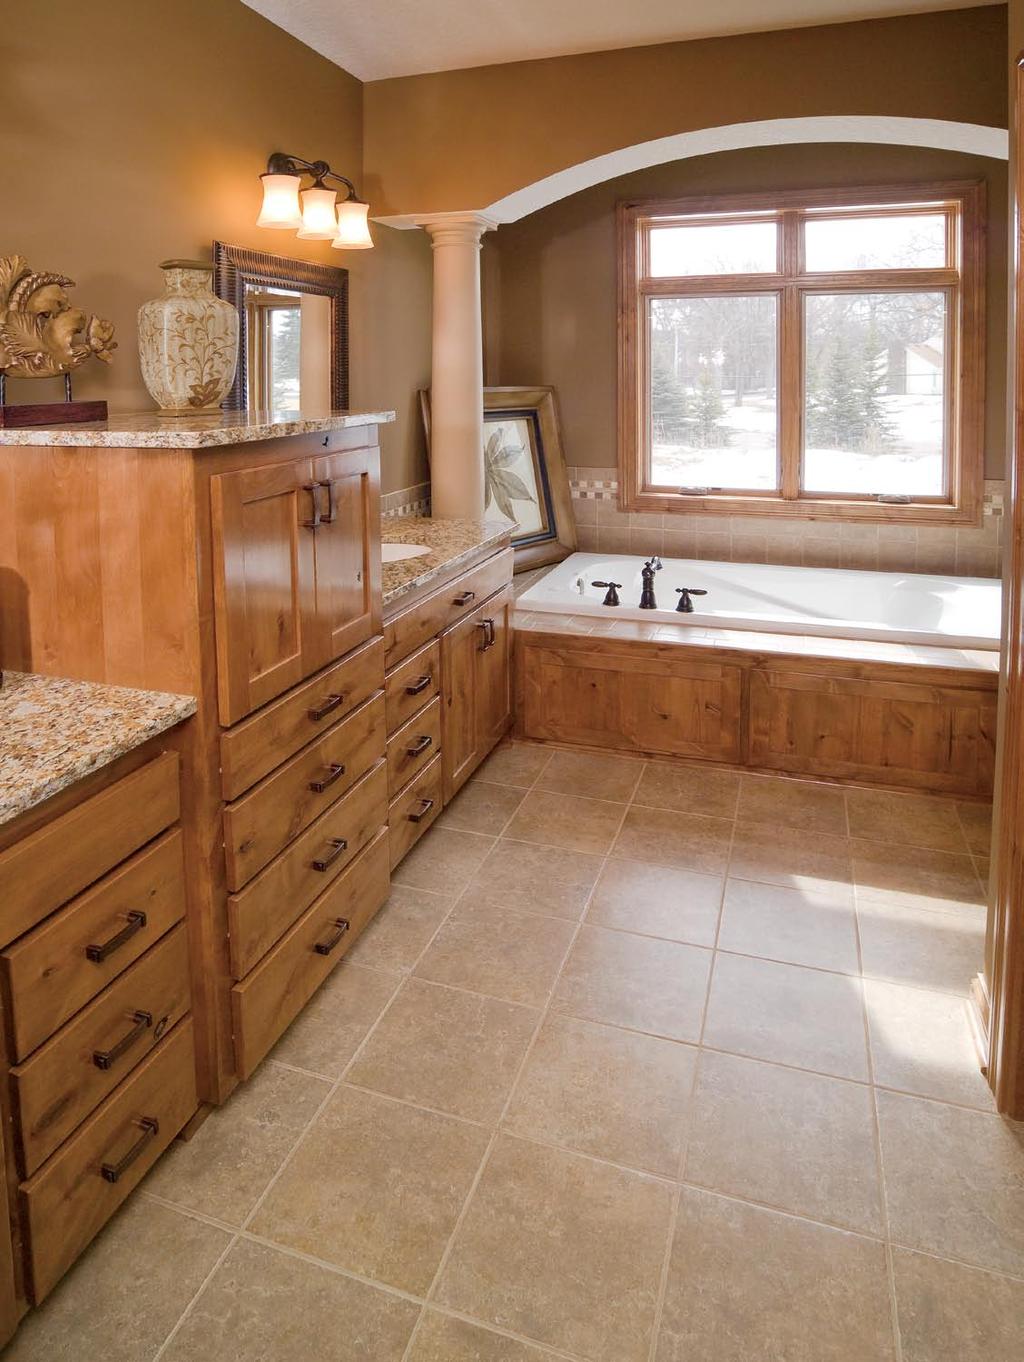 This well-designed master bath boasts luxury features in an effectively planned space.